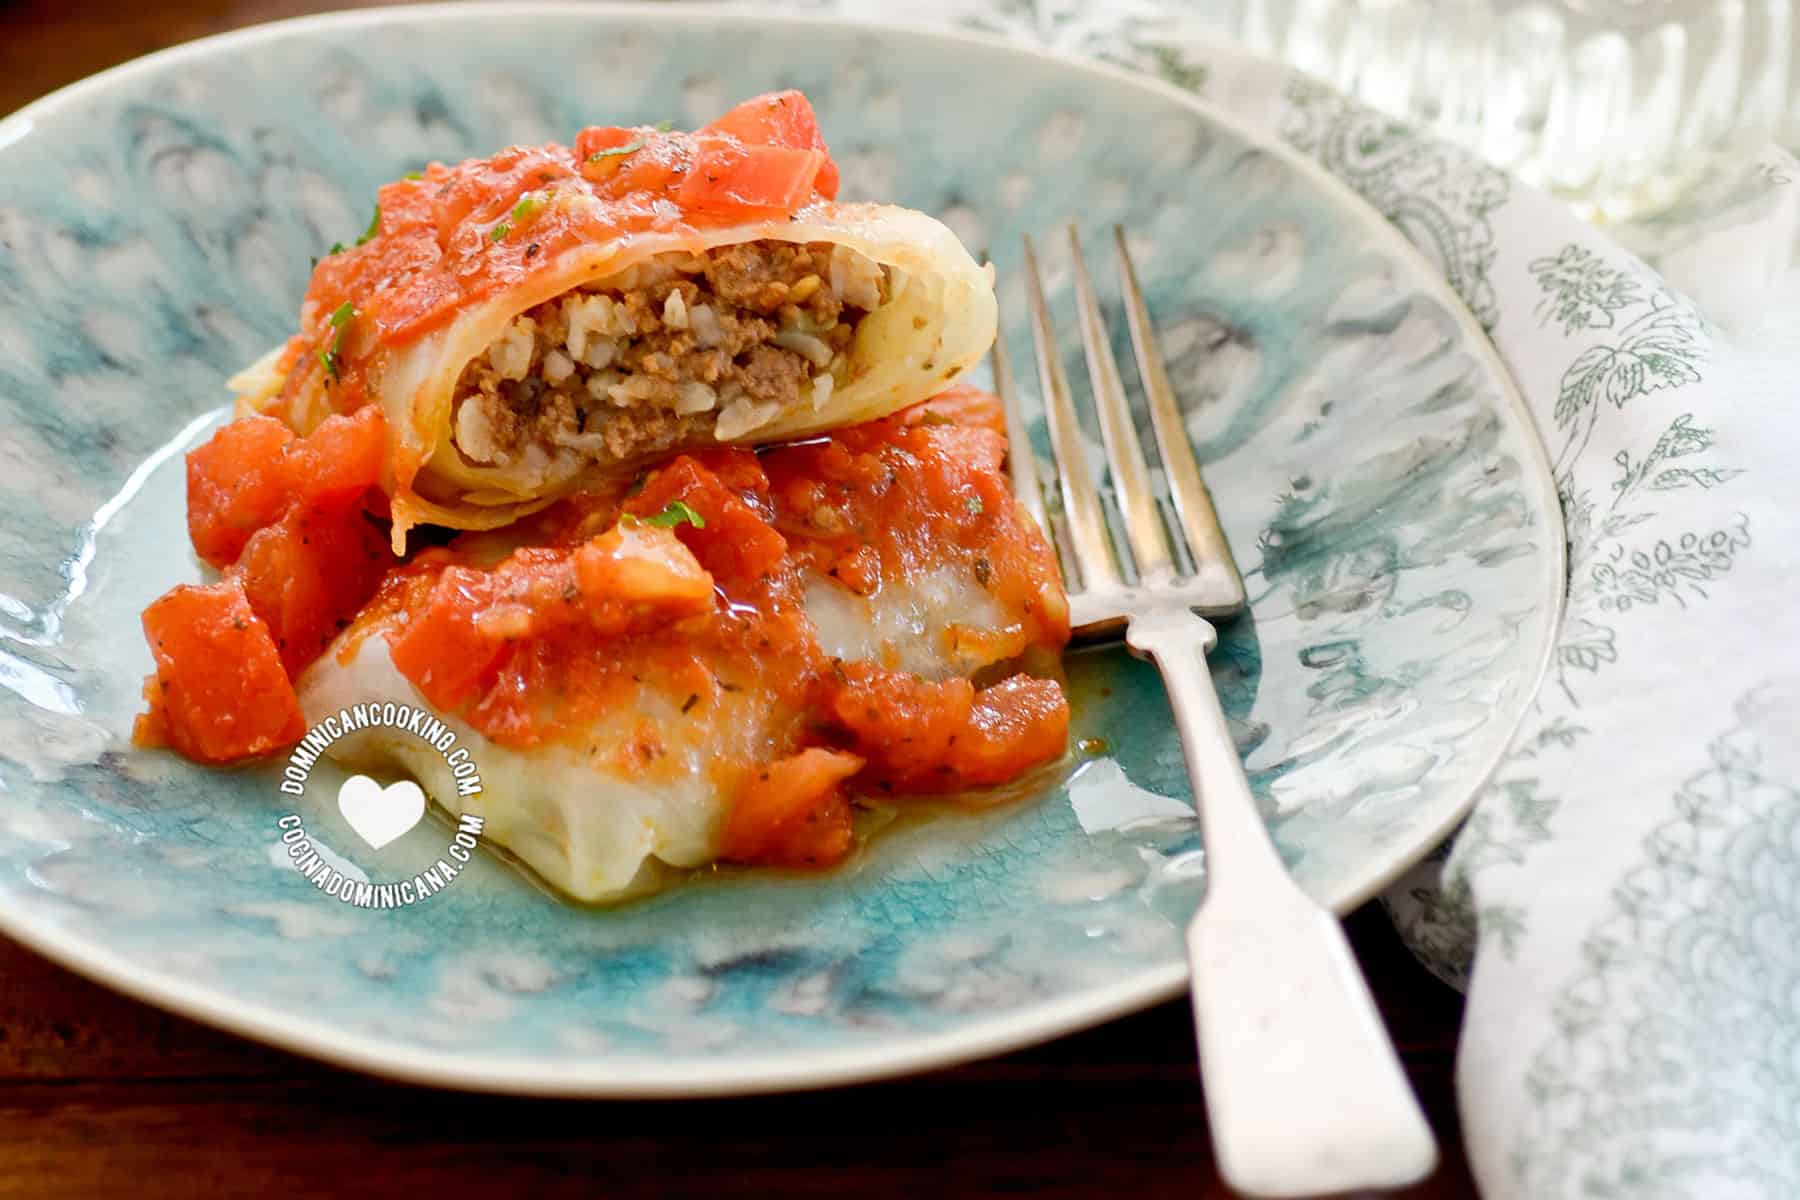 Rice and ground beef cabbage rolls.